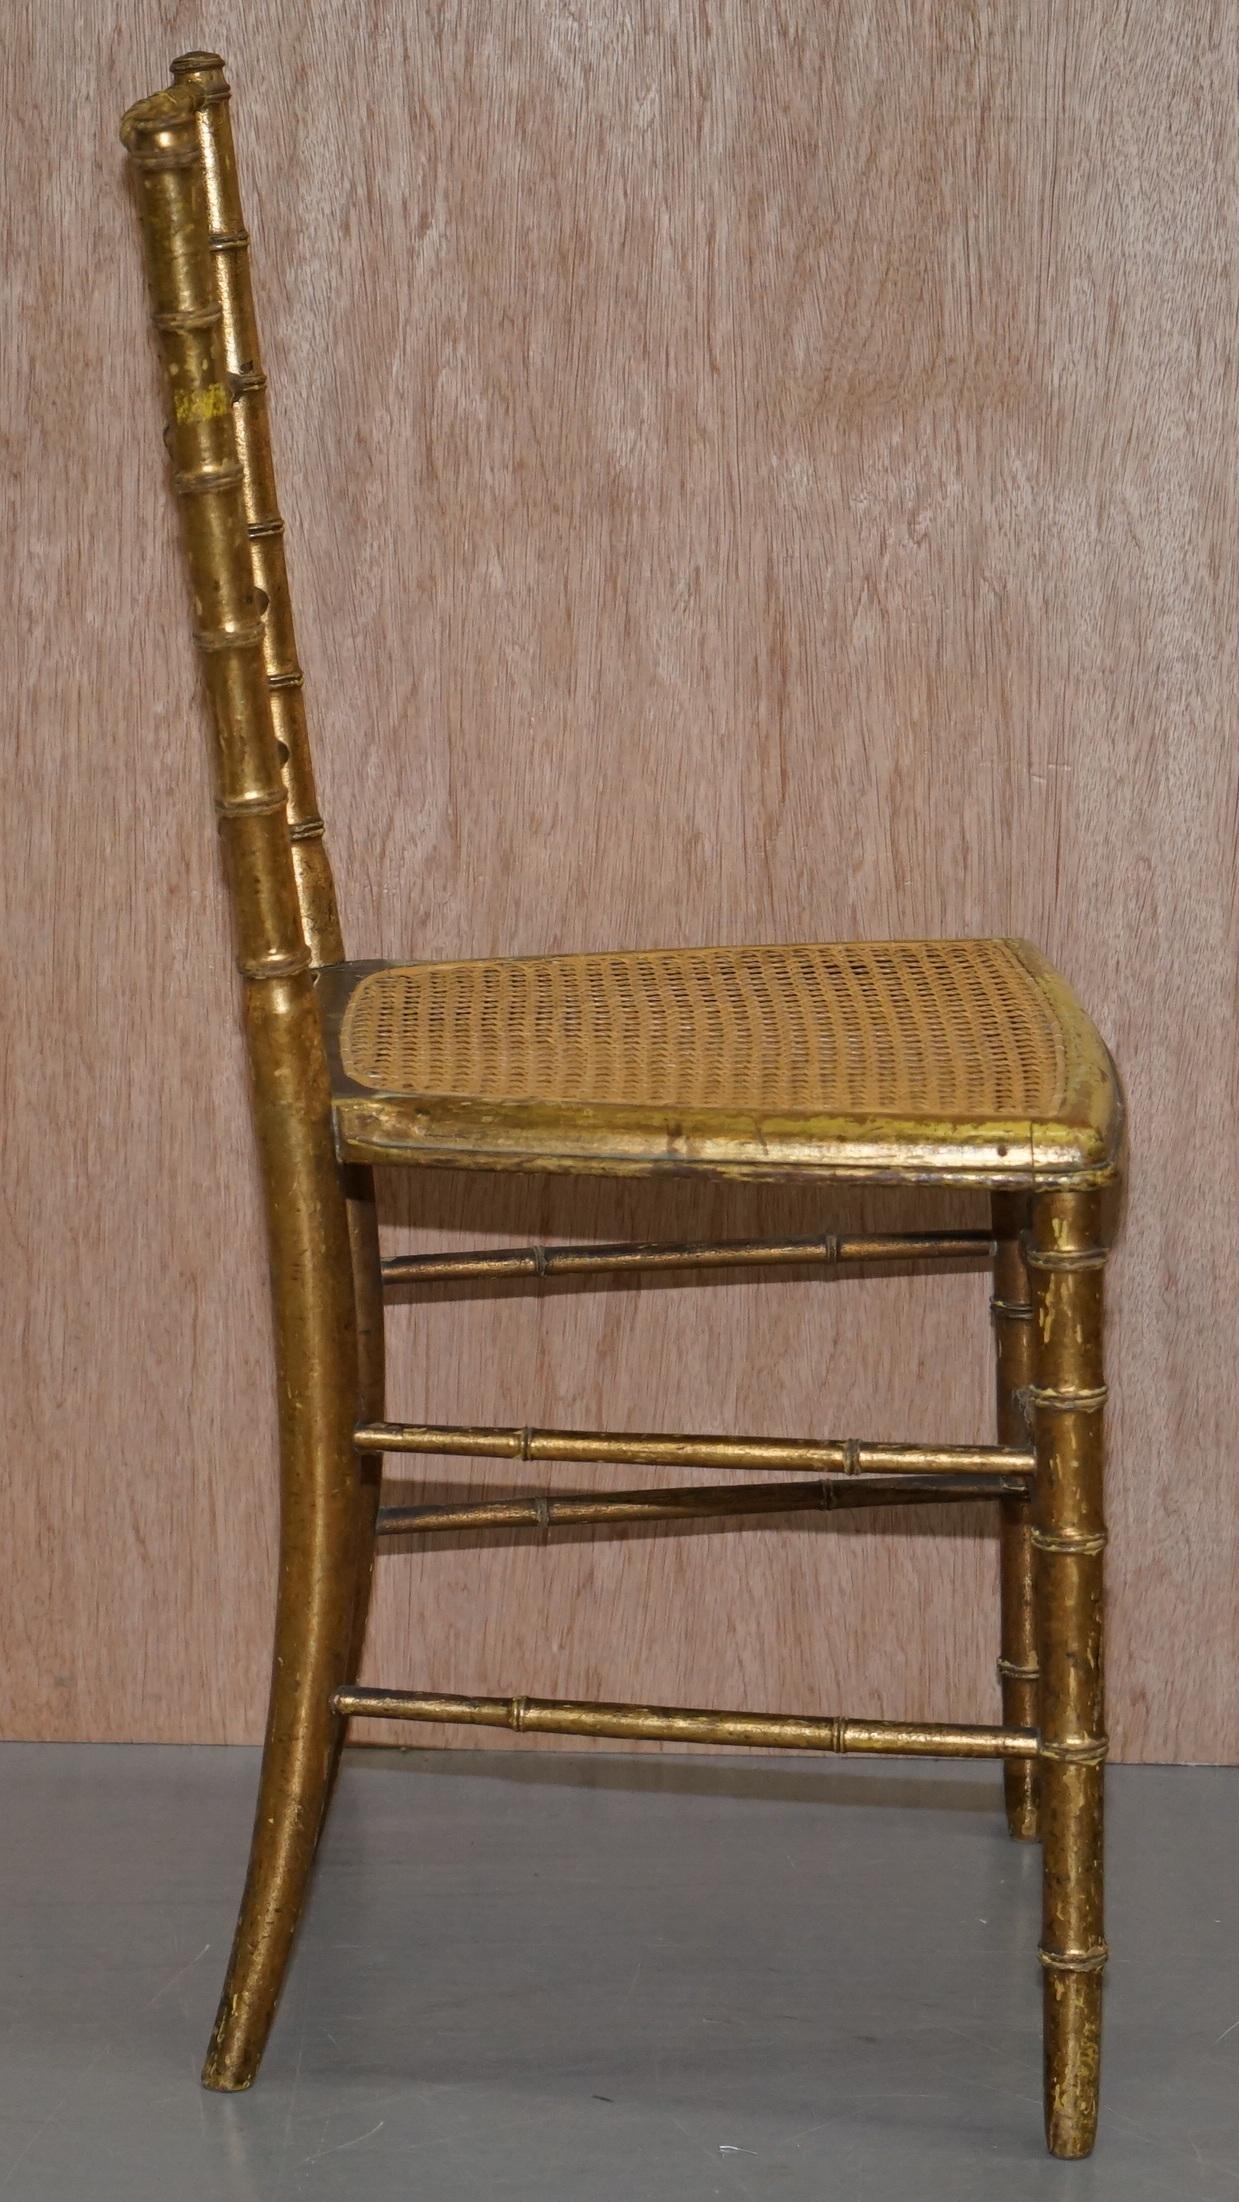 Pair of Original Giltwood Famboo Regency Bergere Chairs with Period Gold Gilding For Sale 4